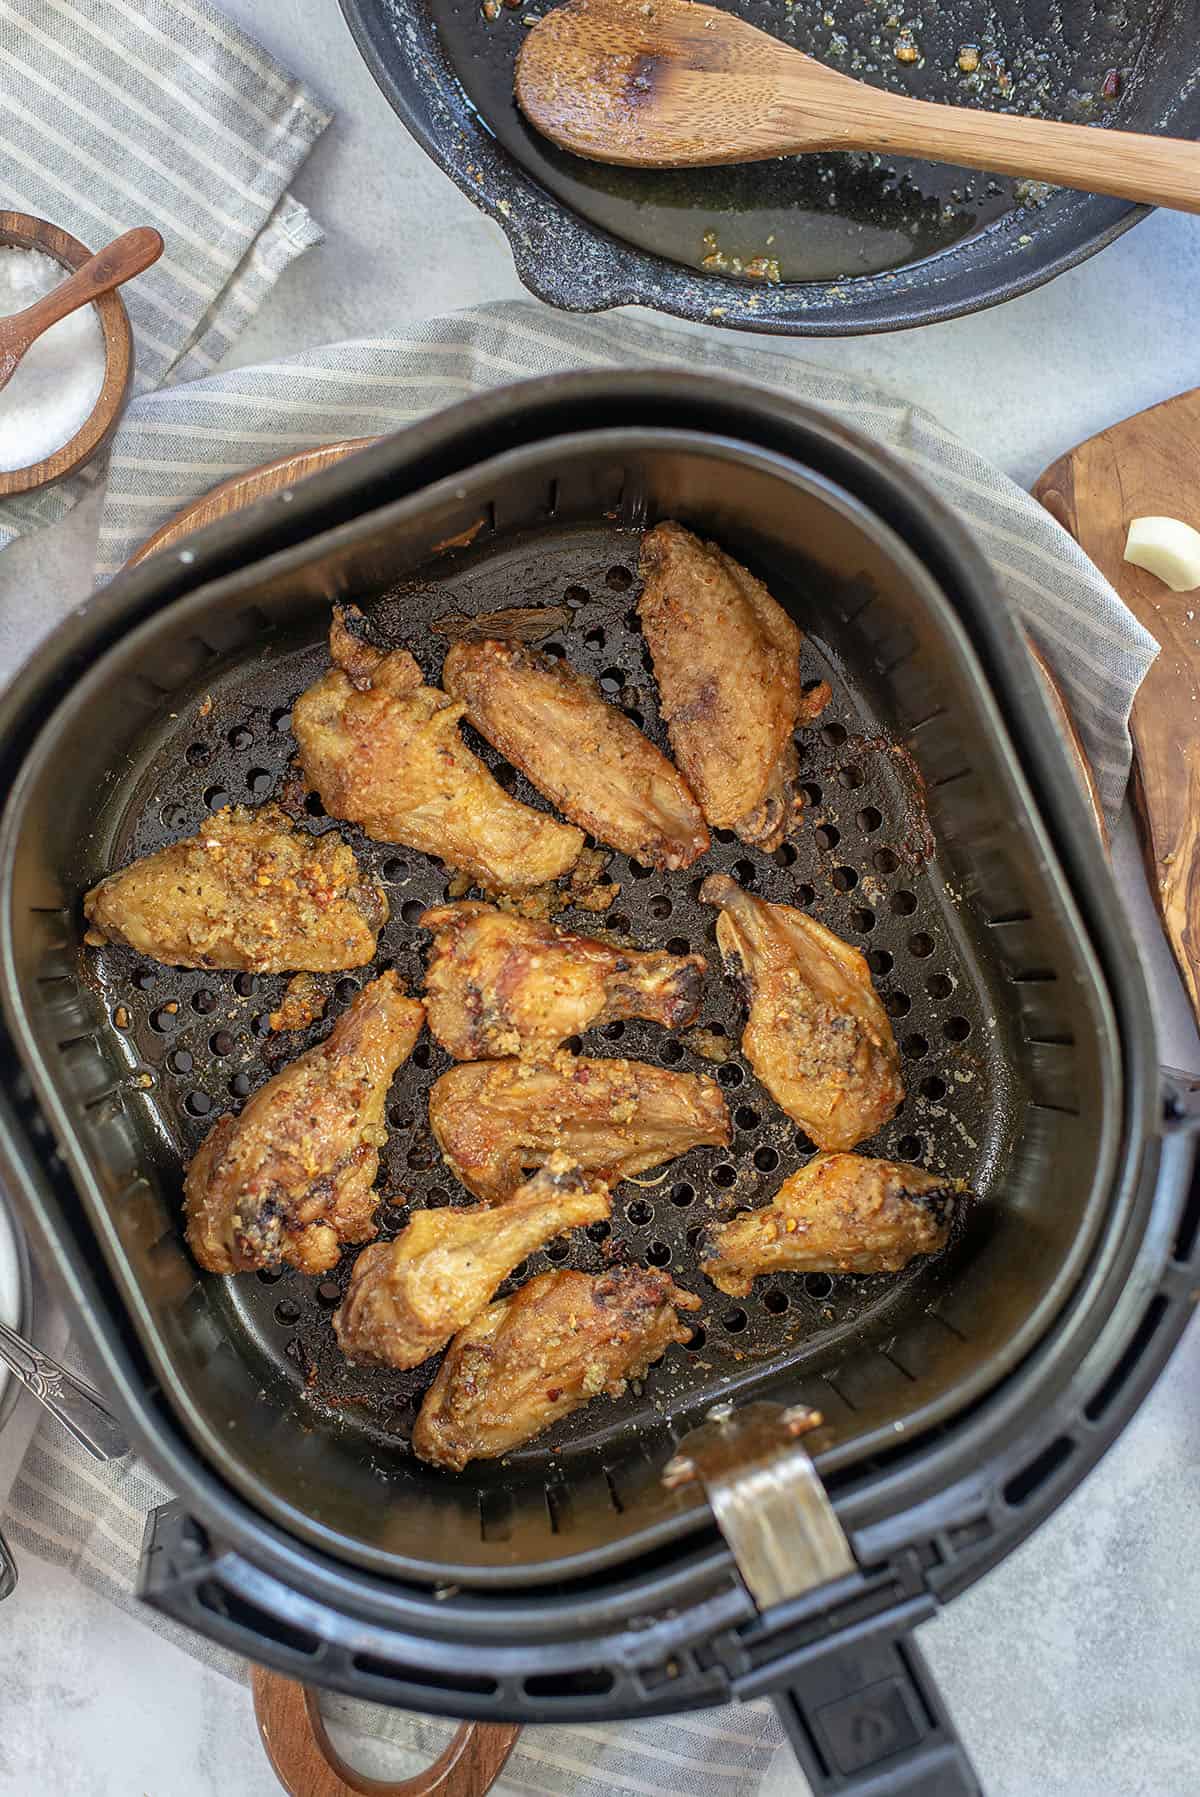 A top down view of an air fryer basket containing garlic parmesan chicken wings.